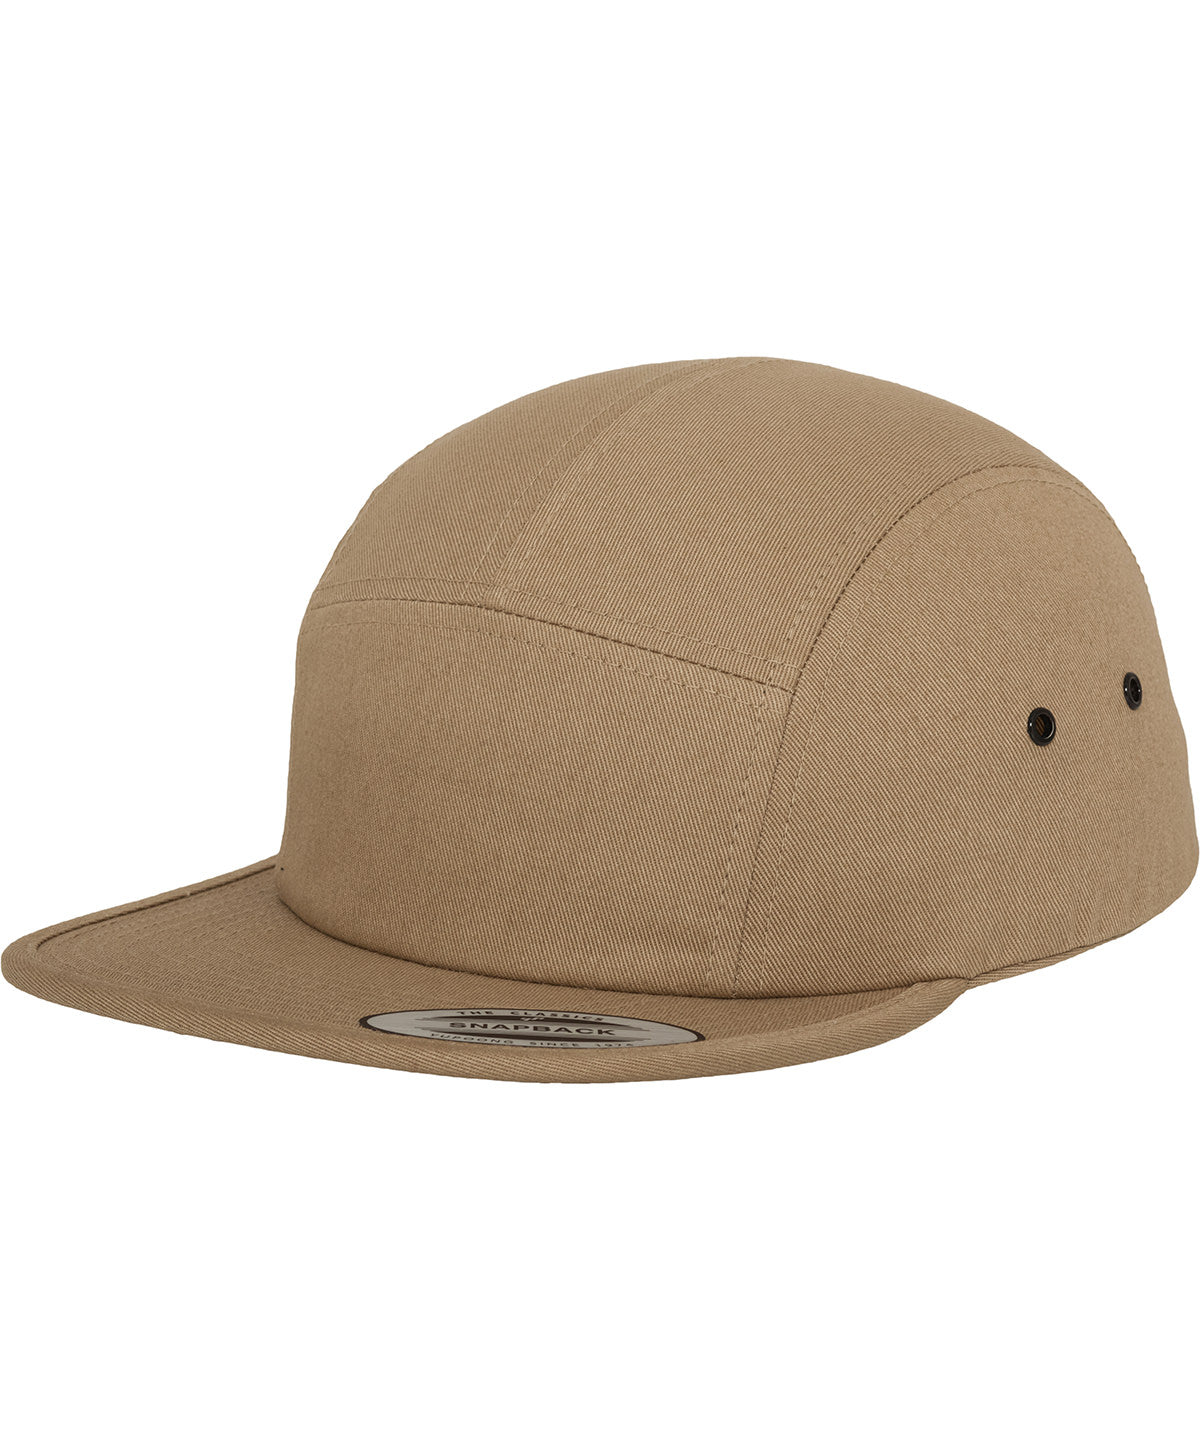 Khaki - Classic 5-panel jockey cap (7005) Caps Flexfit by Yupoong Headwear, Must Haves, New Colours for 2023, Rebrandable Schoolwear Centres